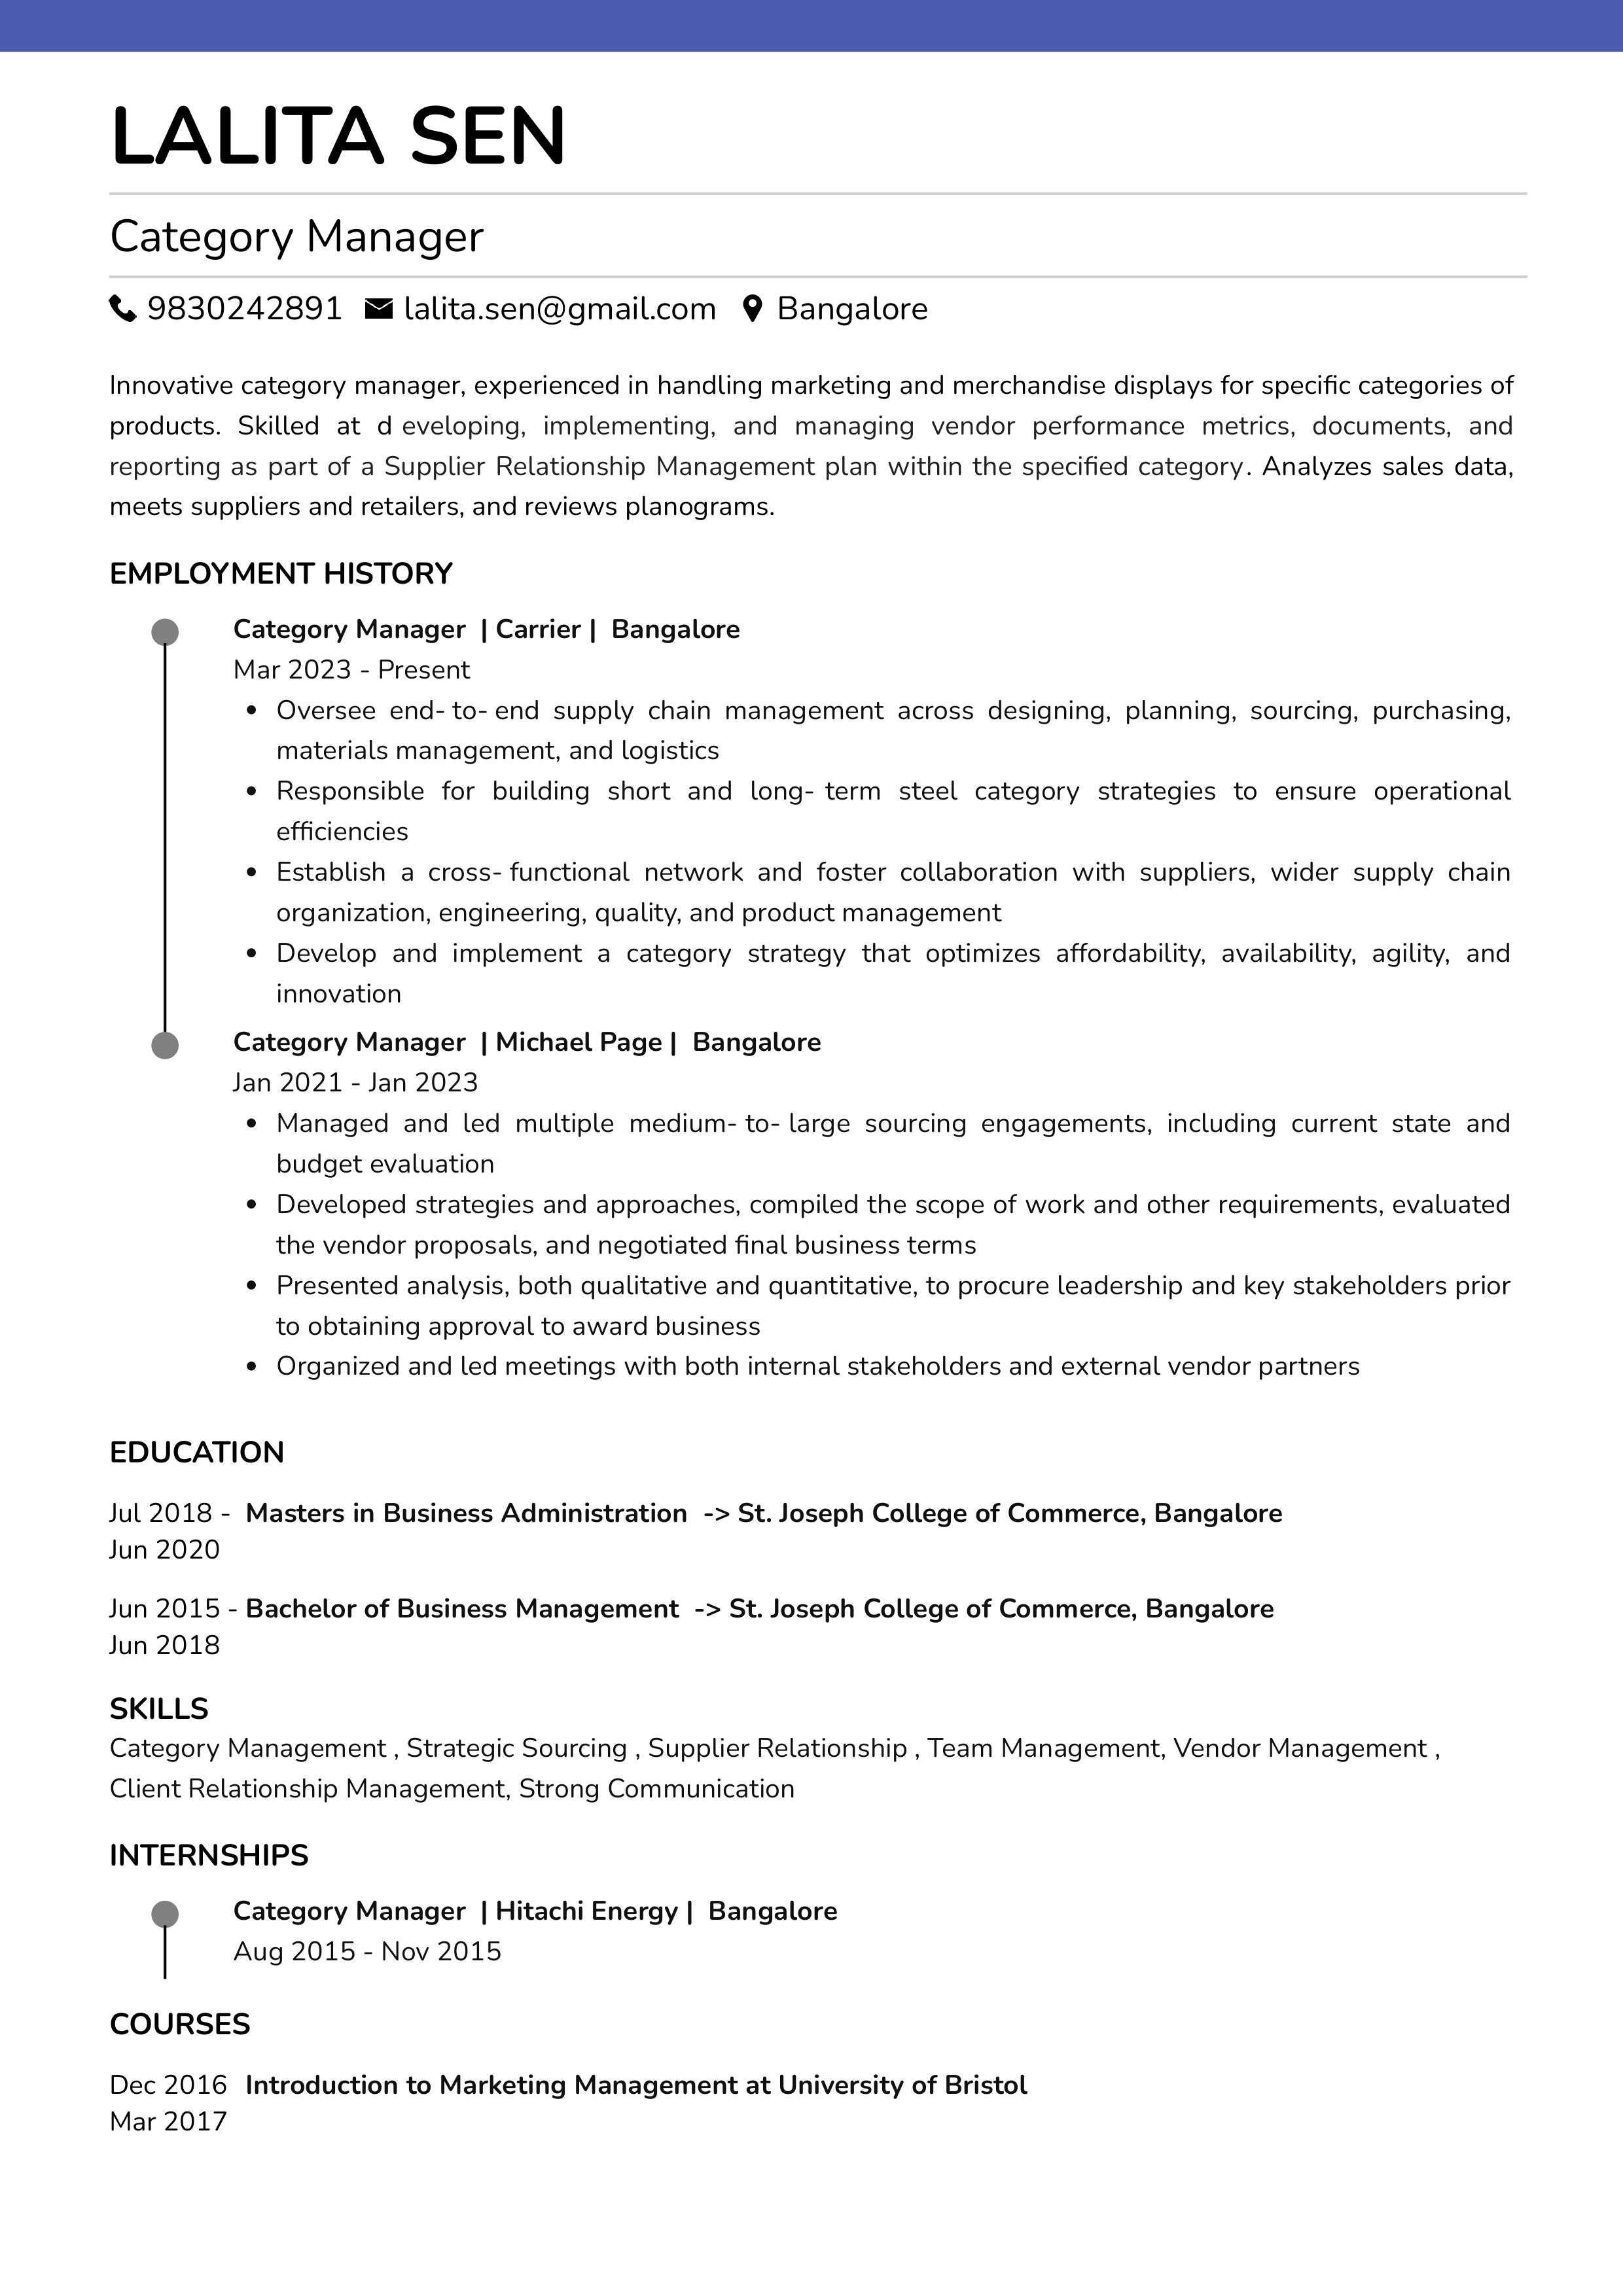 Resume of Category Manager